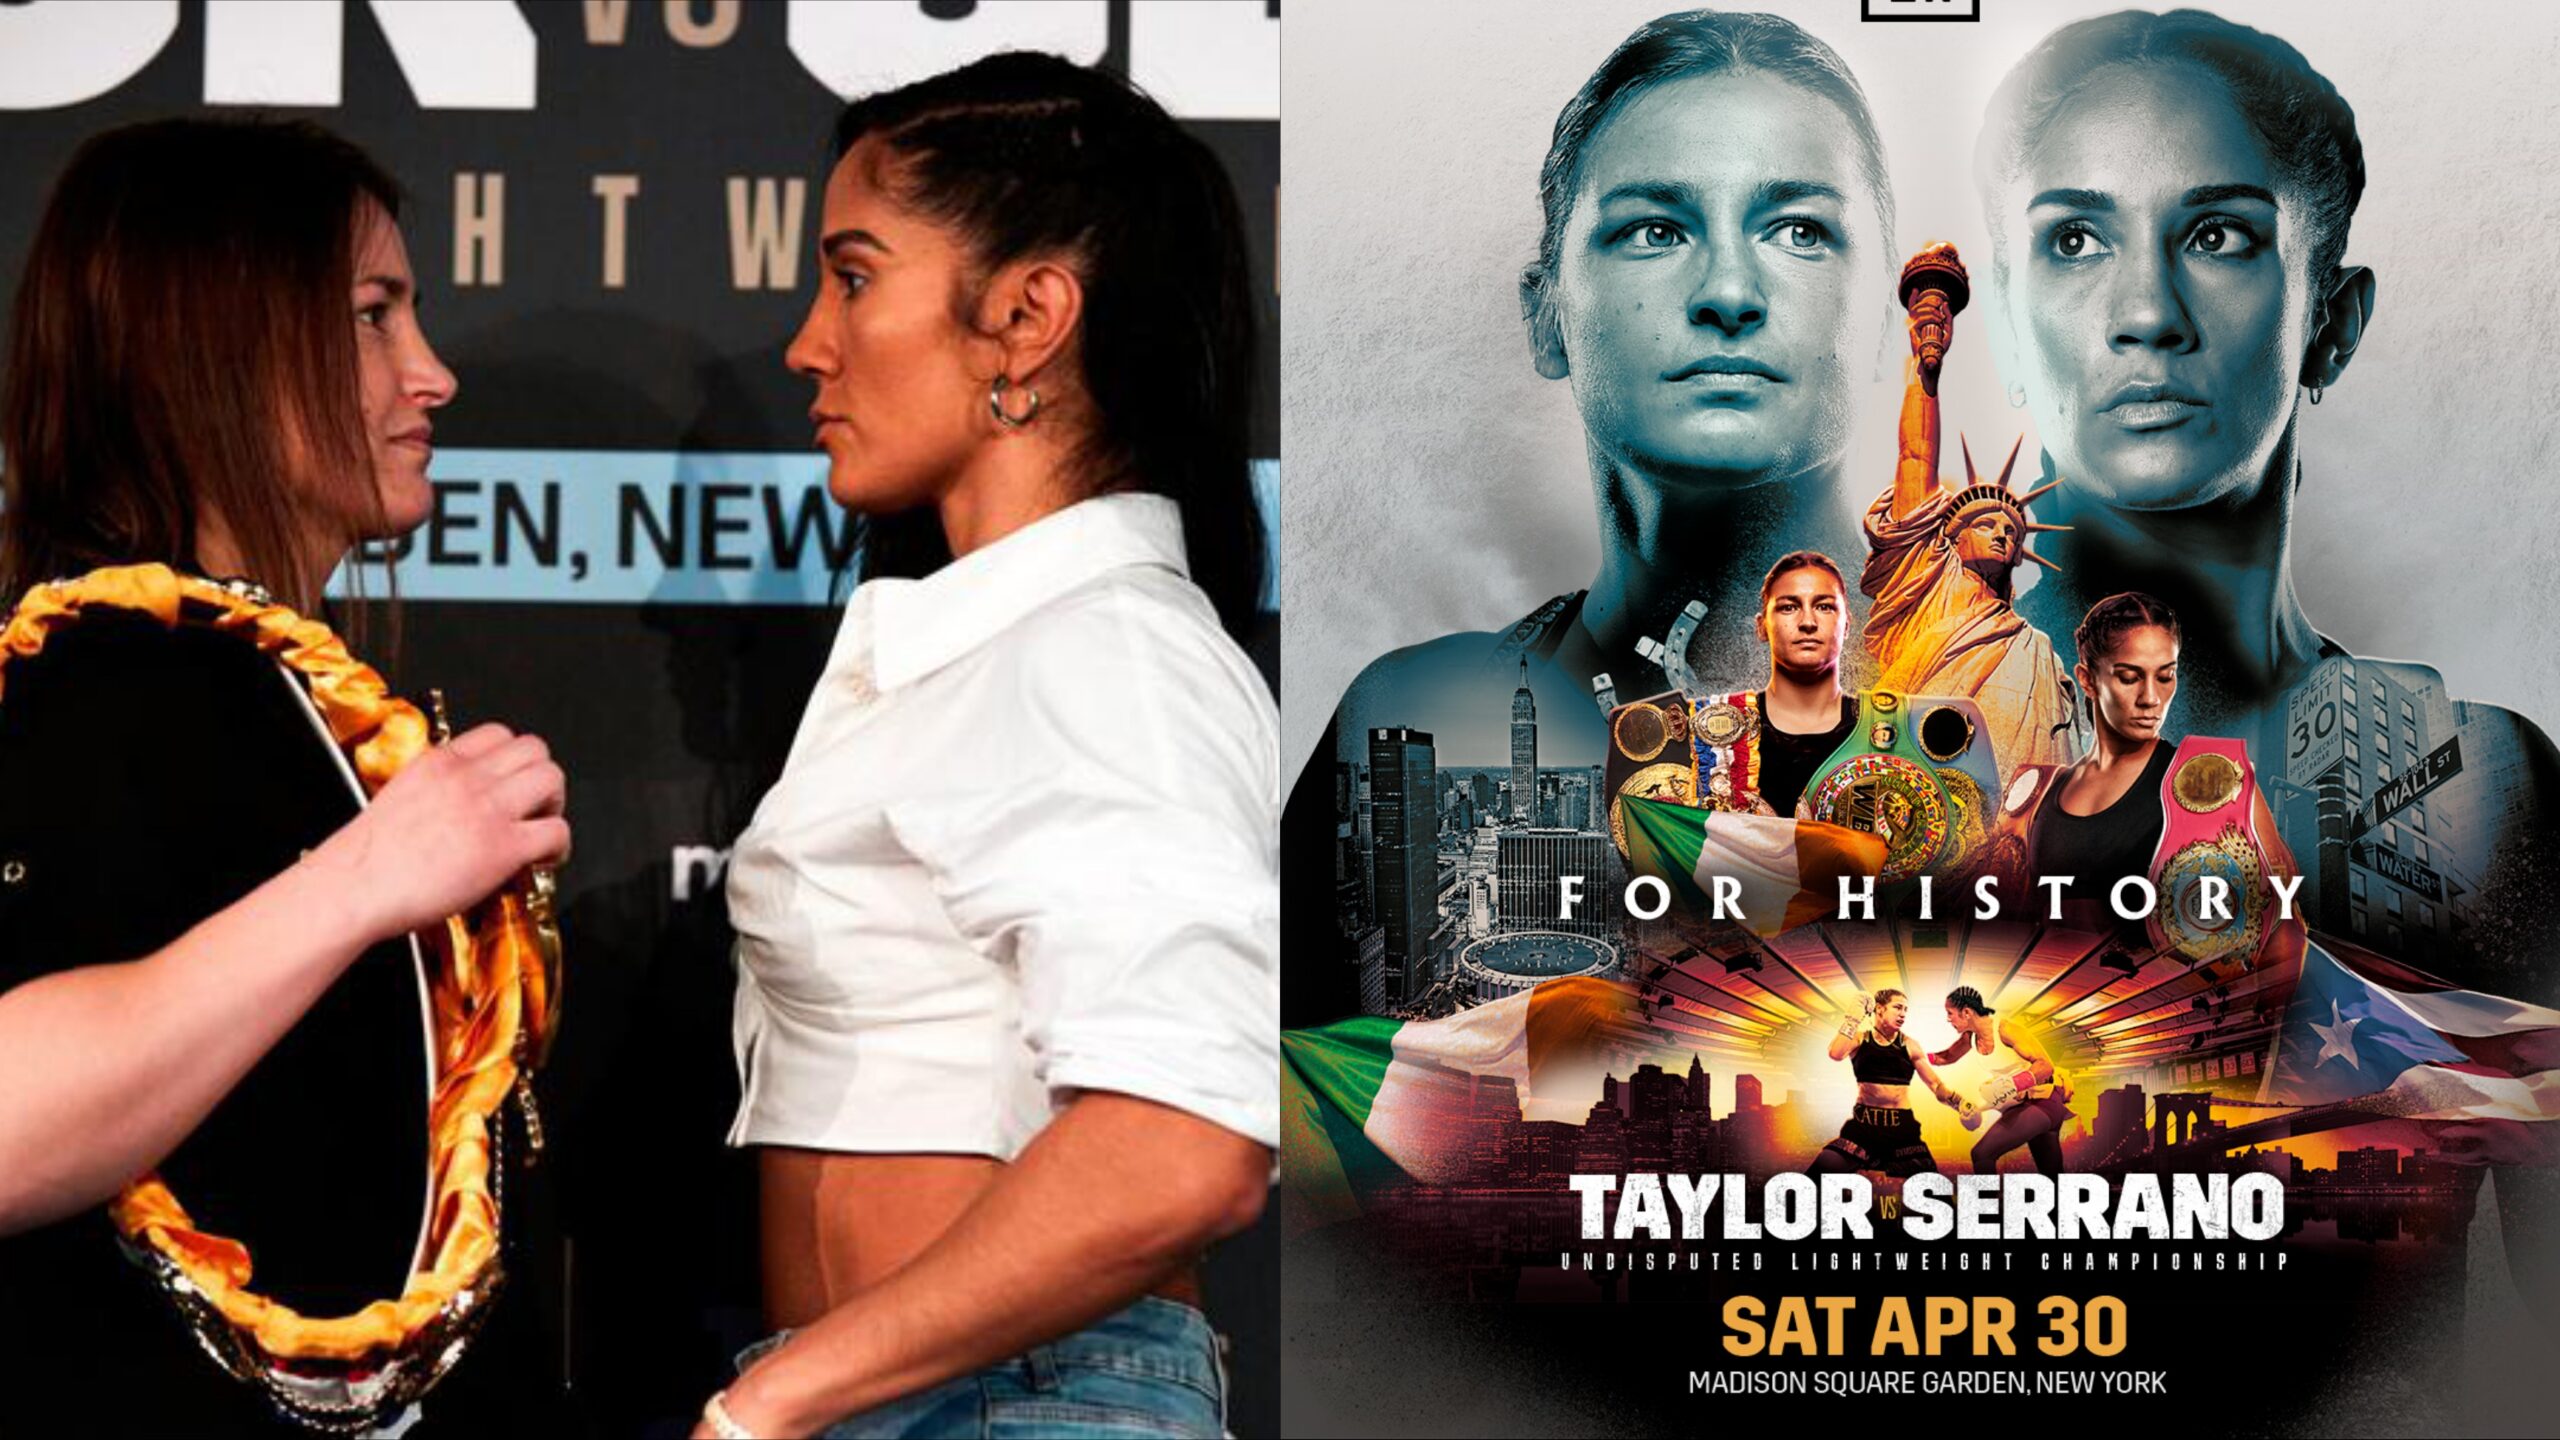 Amanda Serrano and Katie Taylor face off and fight poster